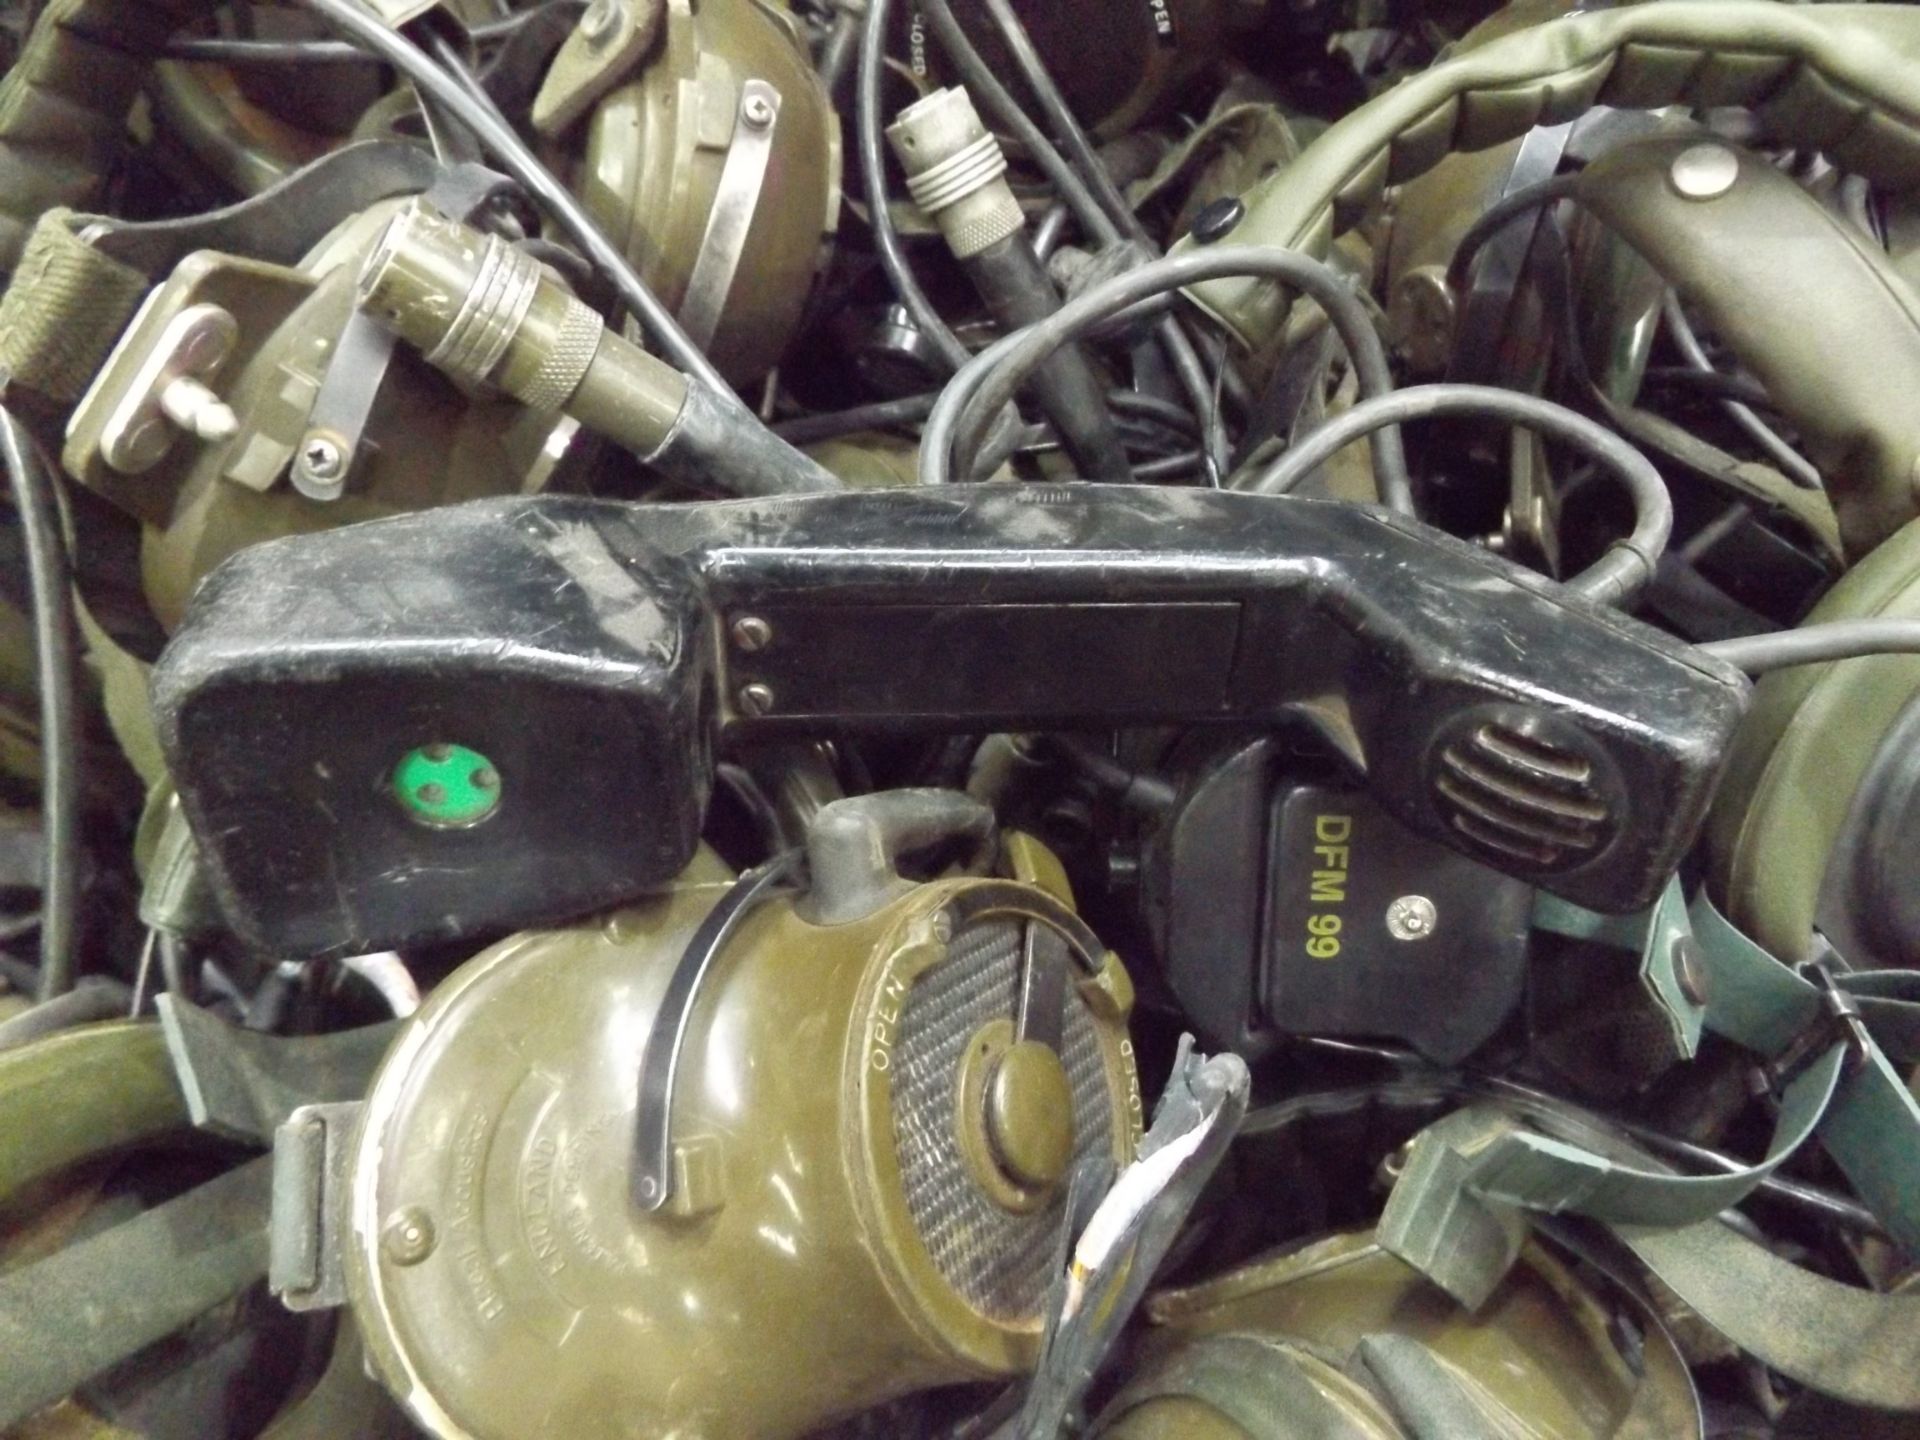 Approx 150 x Clansman Headsets, Handsets and Accessories - Image 5 of 5